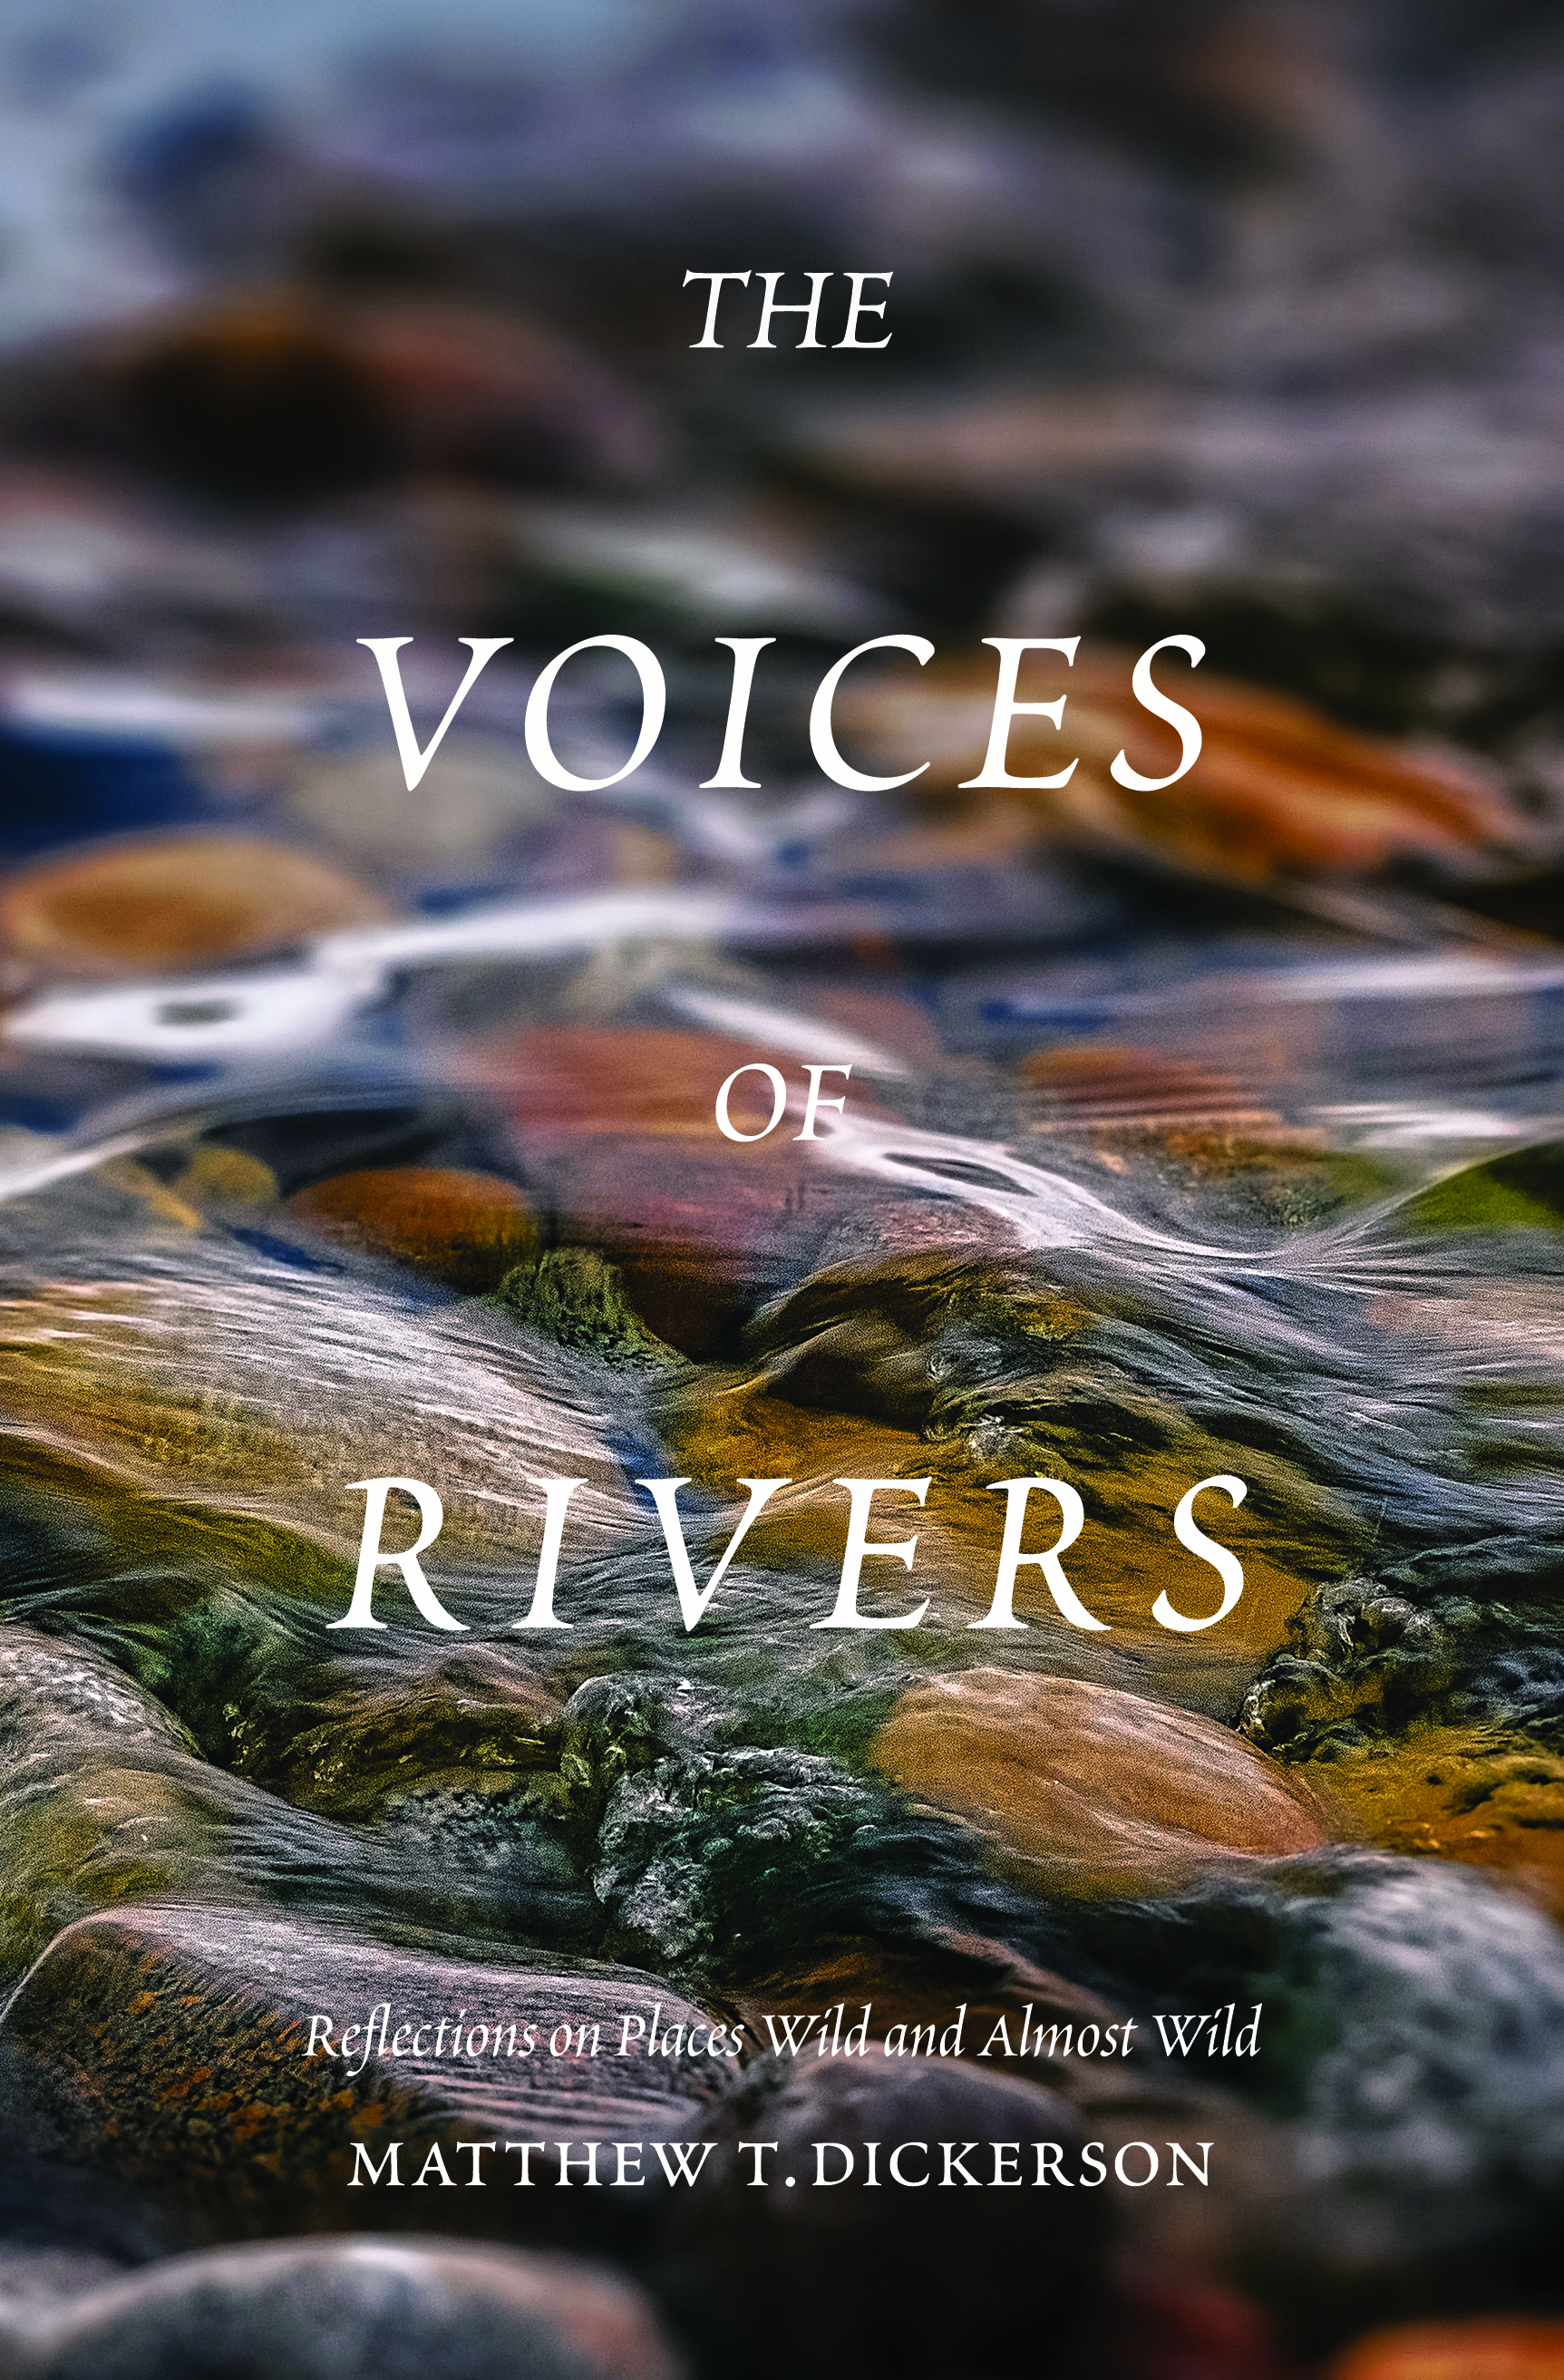 'The Voices of Rivers' book cover